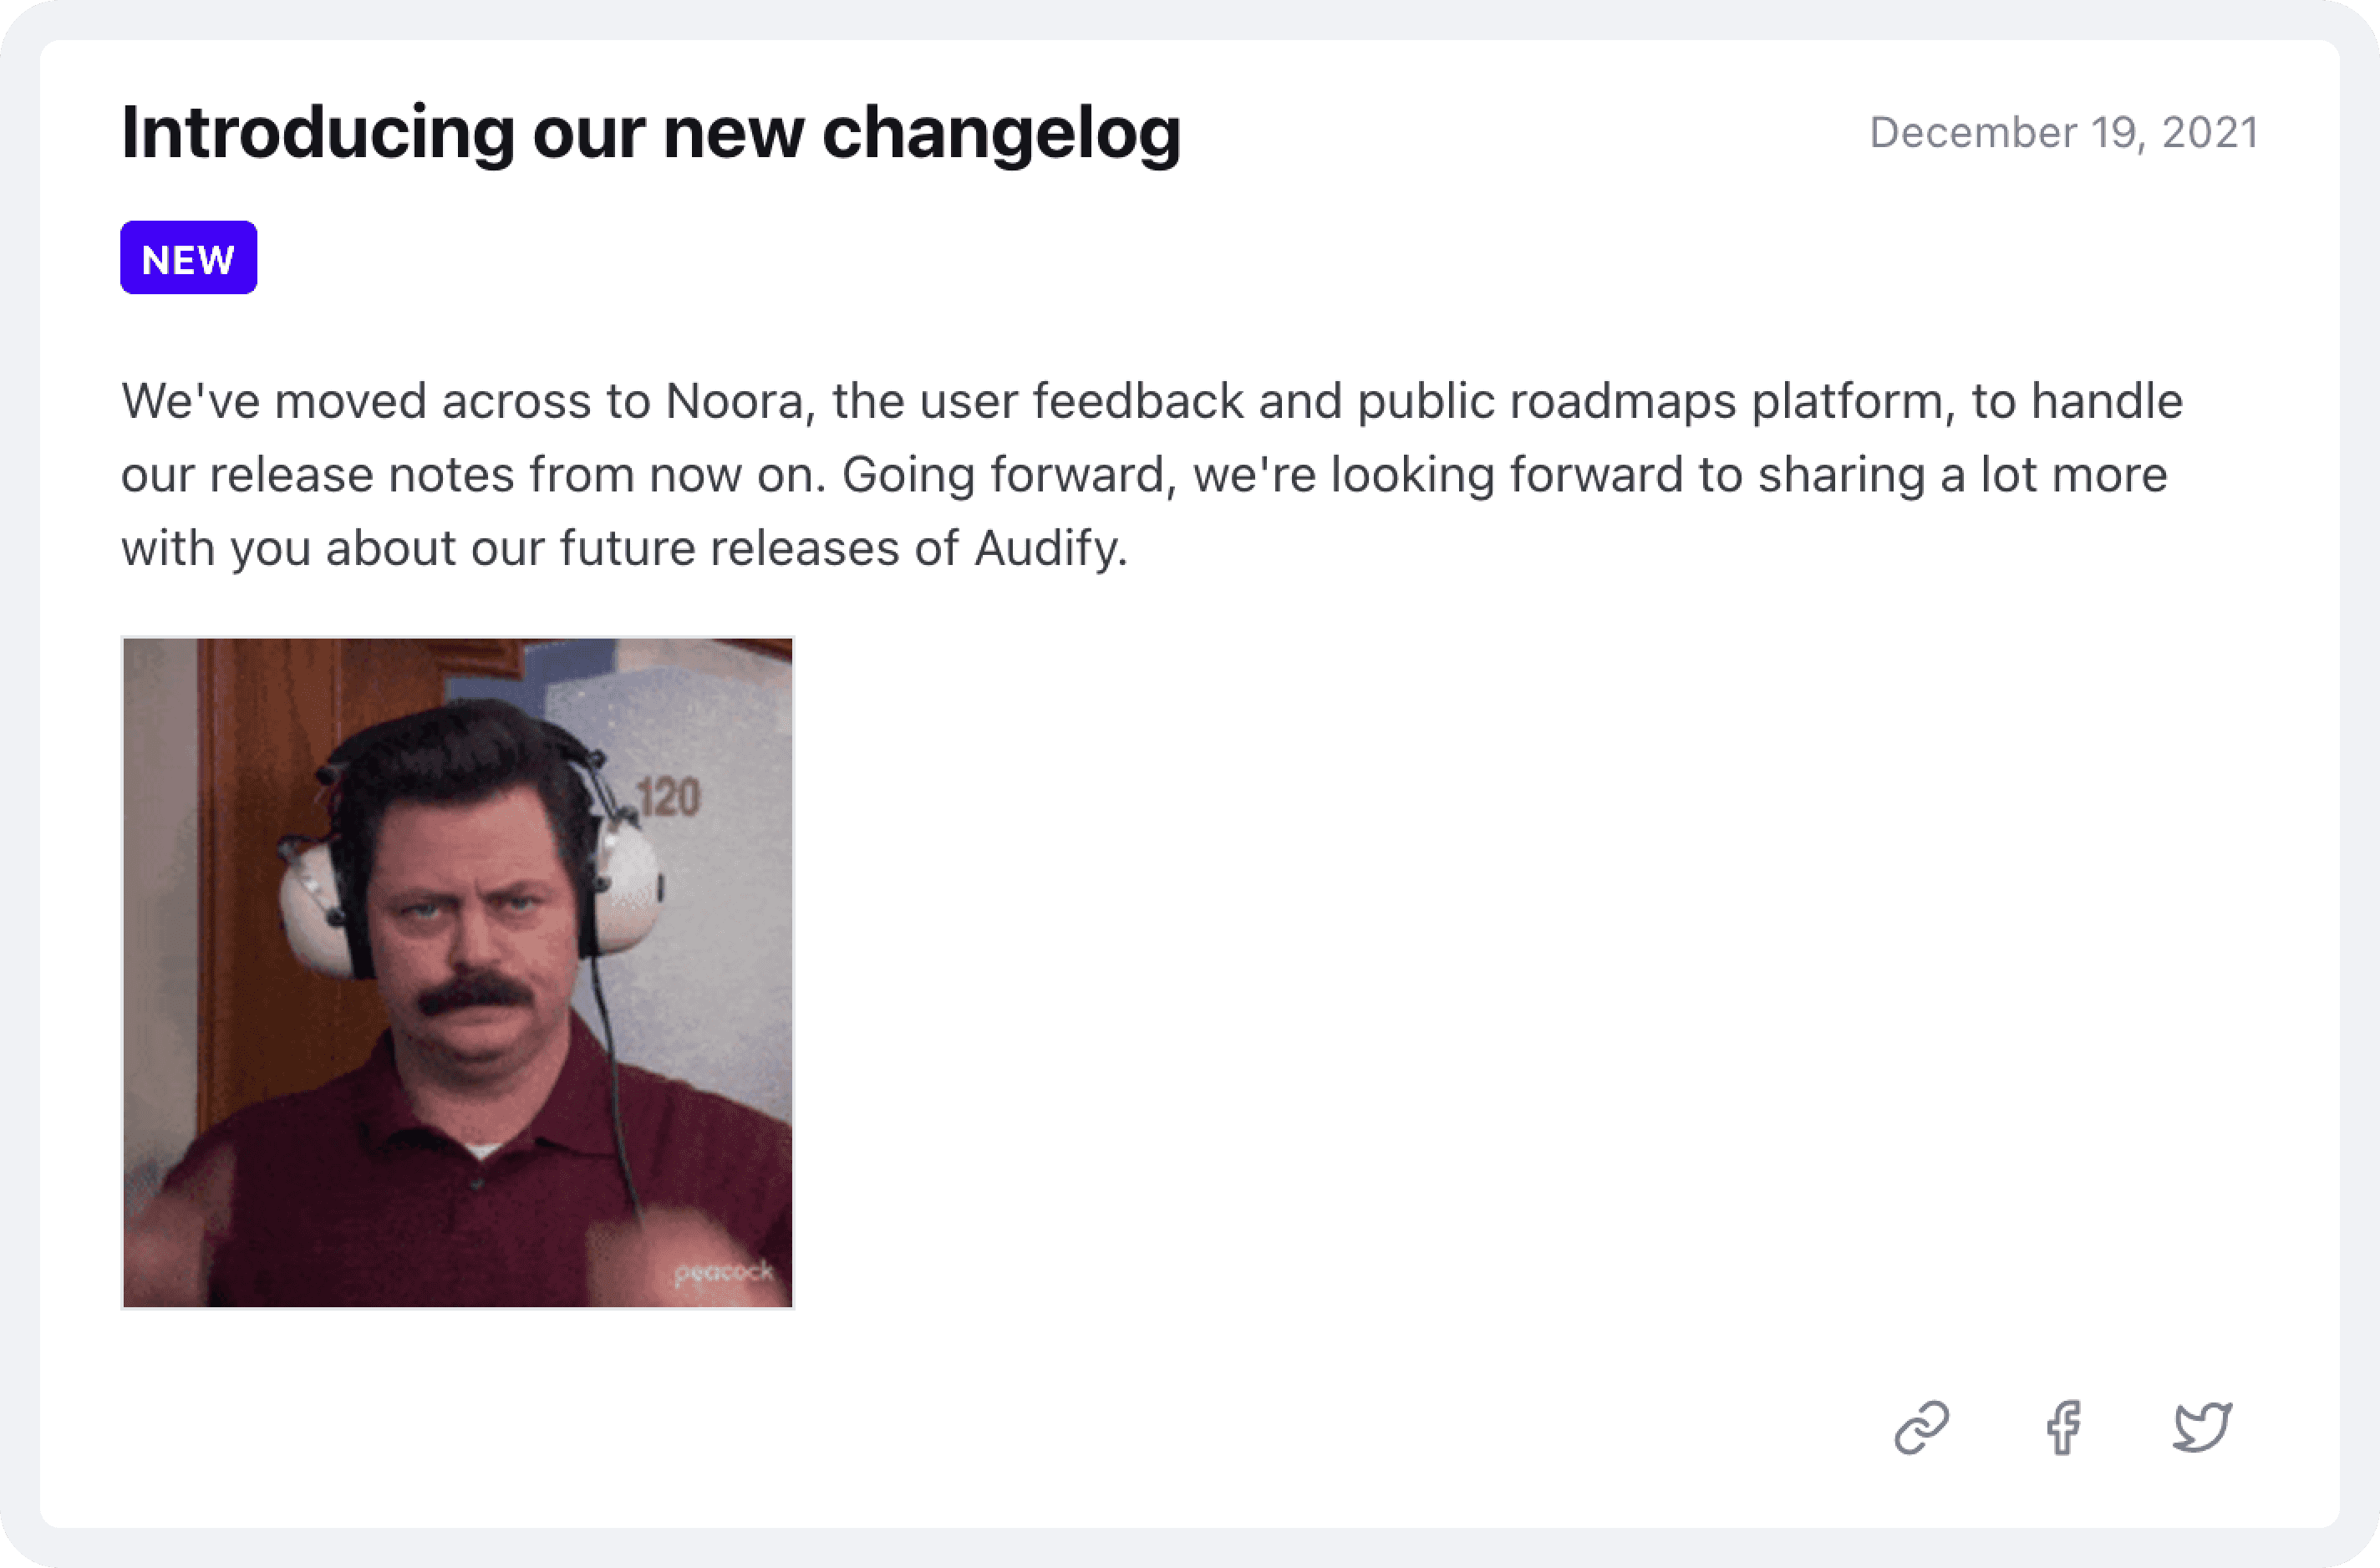 A preview of Noora's changelogs